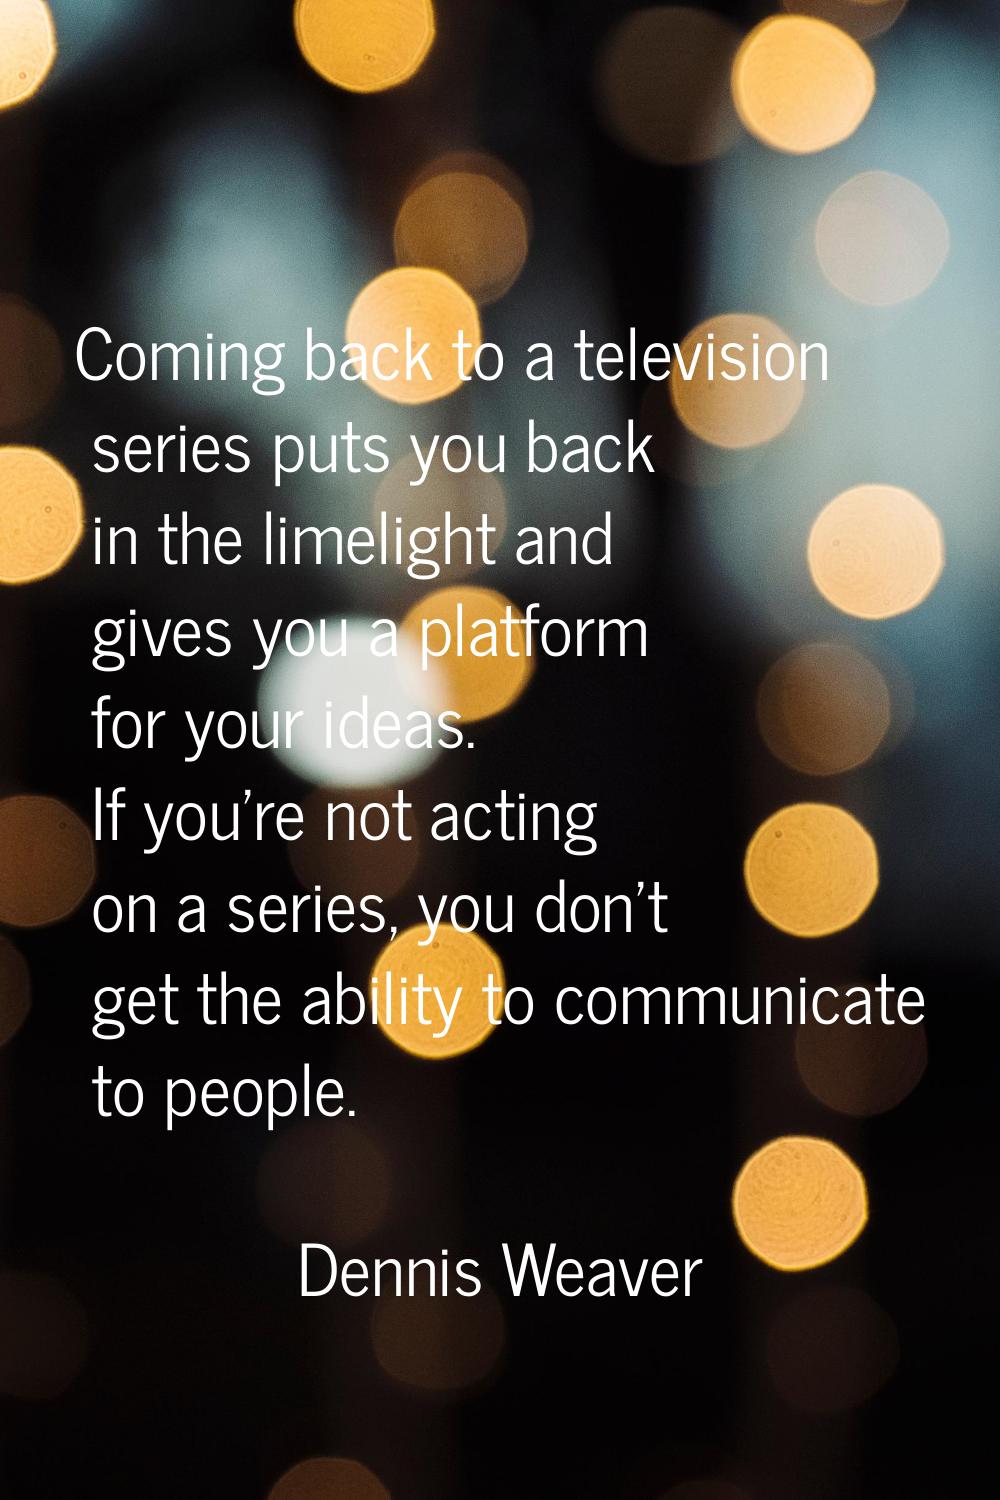 Coming back to a television series puts you back in the limelight and gives you a platform for your